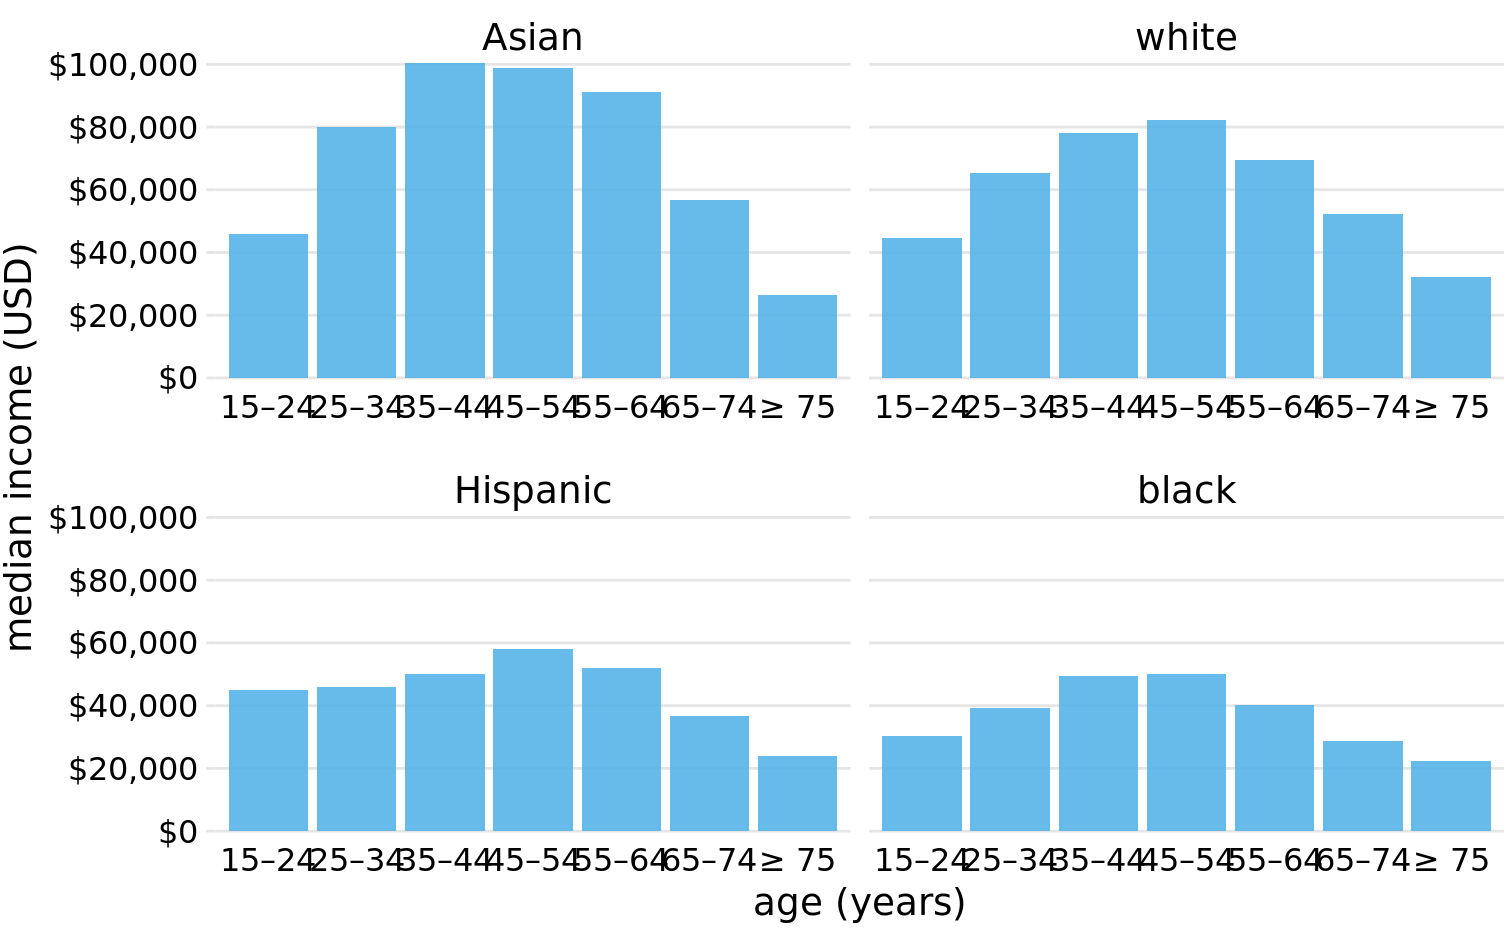 2016 median U.S. annual household income versus age group and race. Instead of displaying this data as a grouped bar plot, as in Figures 6.7 and 6.8, we now show the data as four separate regular bar plots. This choice has the advantage that we don’t need to encode either categorical variable by bar color. Data source: United States Census Bureau